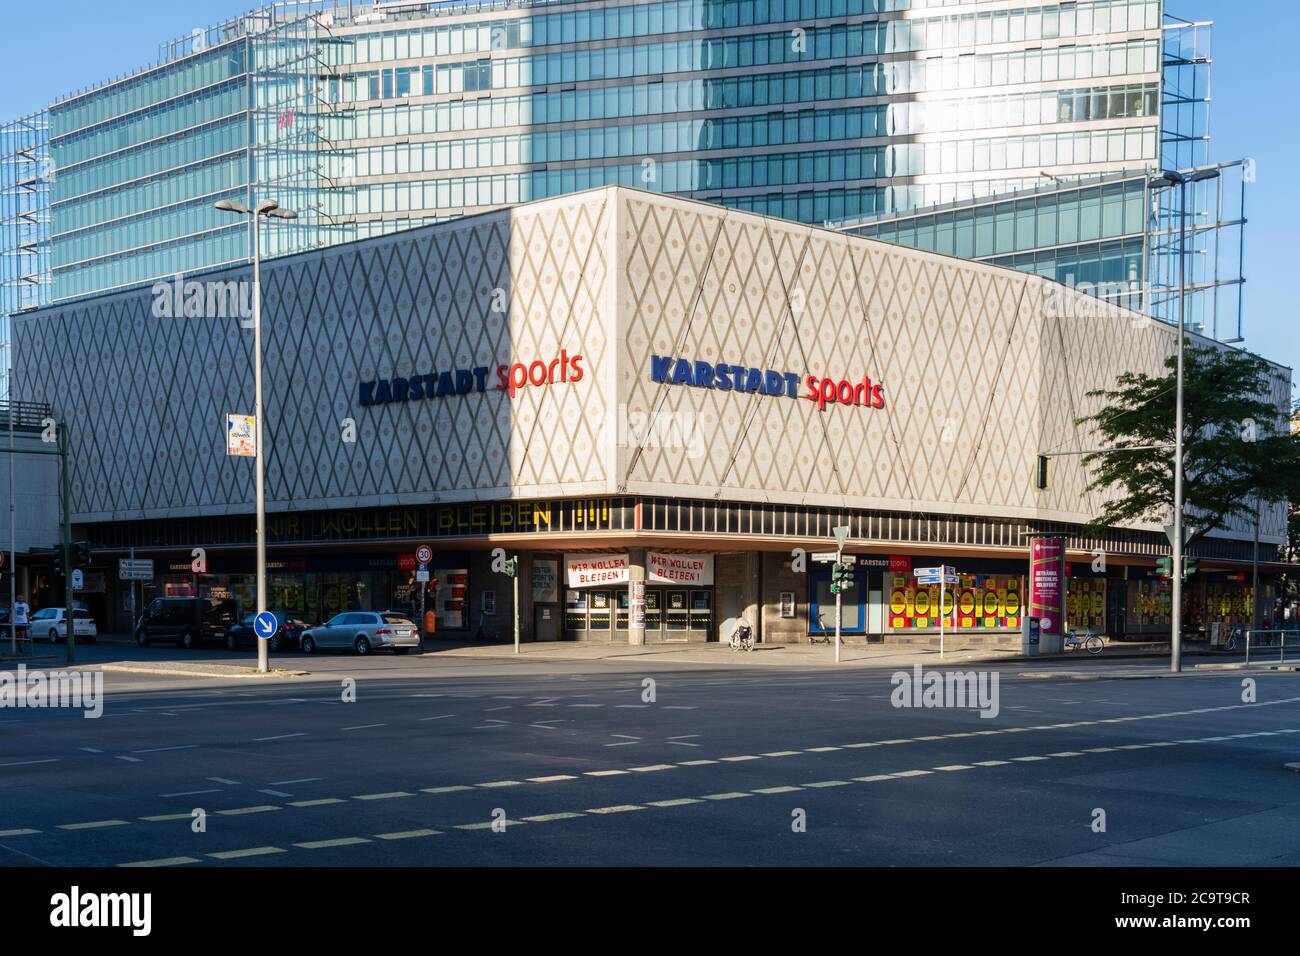 Karstadt Sports with employee banners shortly before closing in landscape format Stock Photo